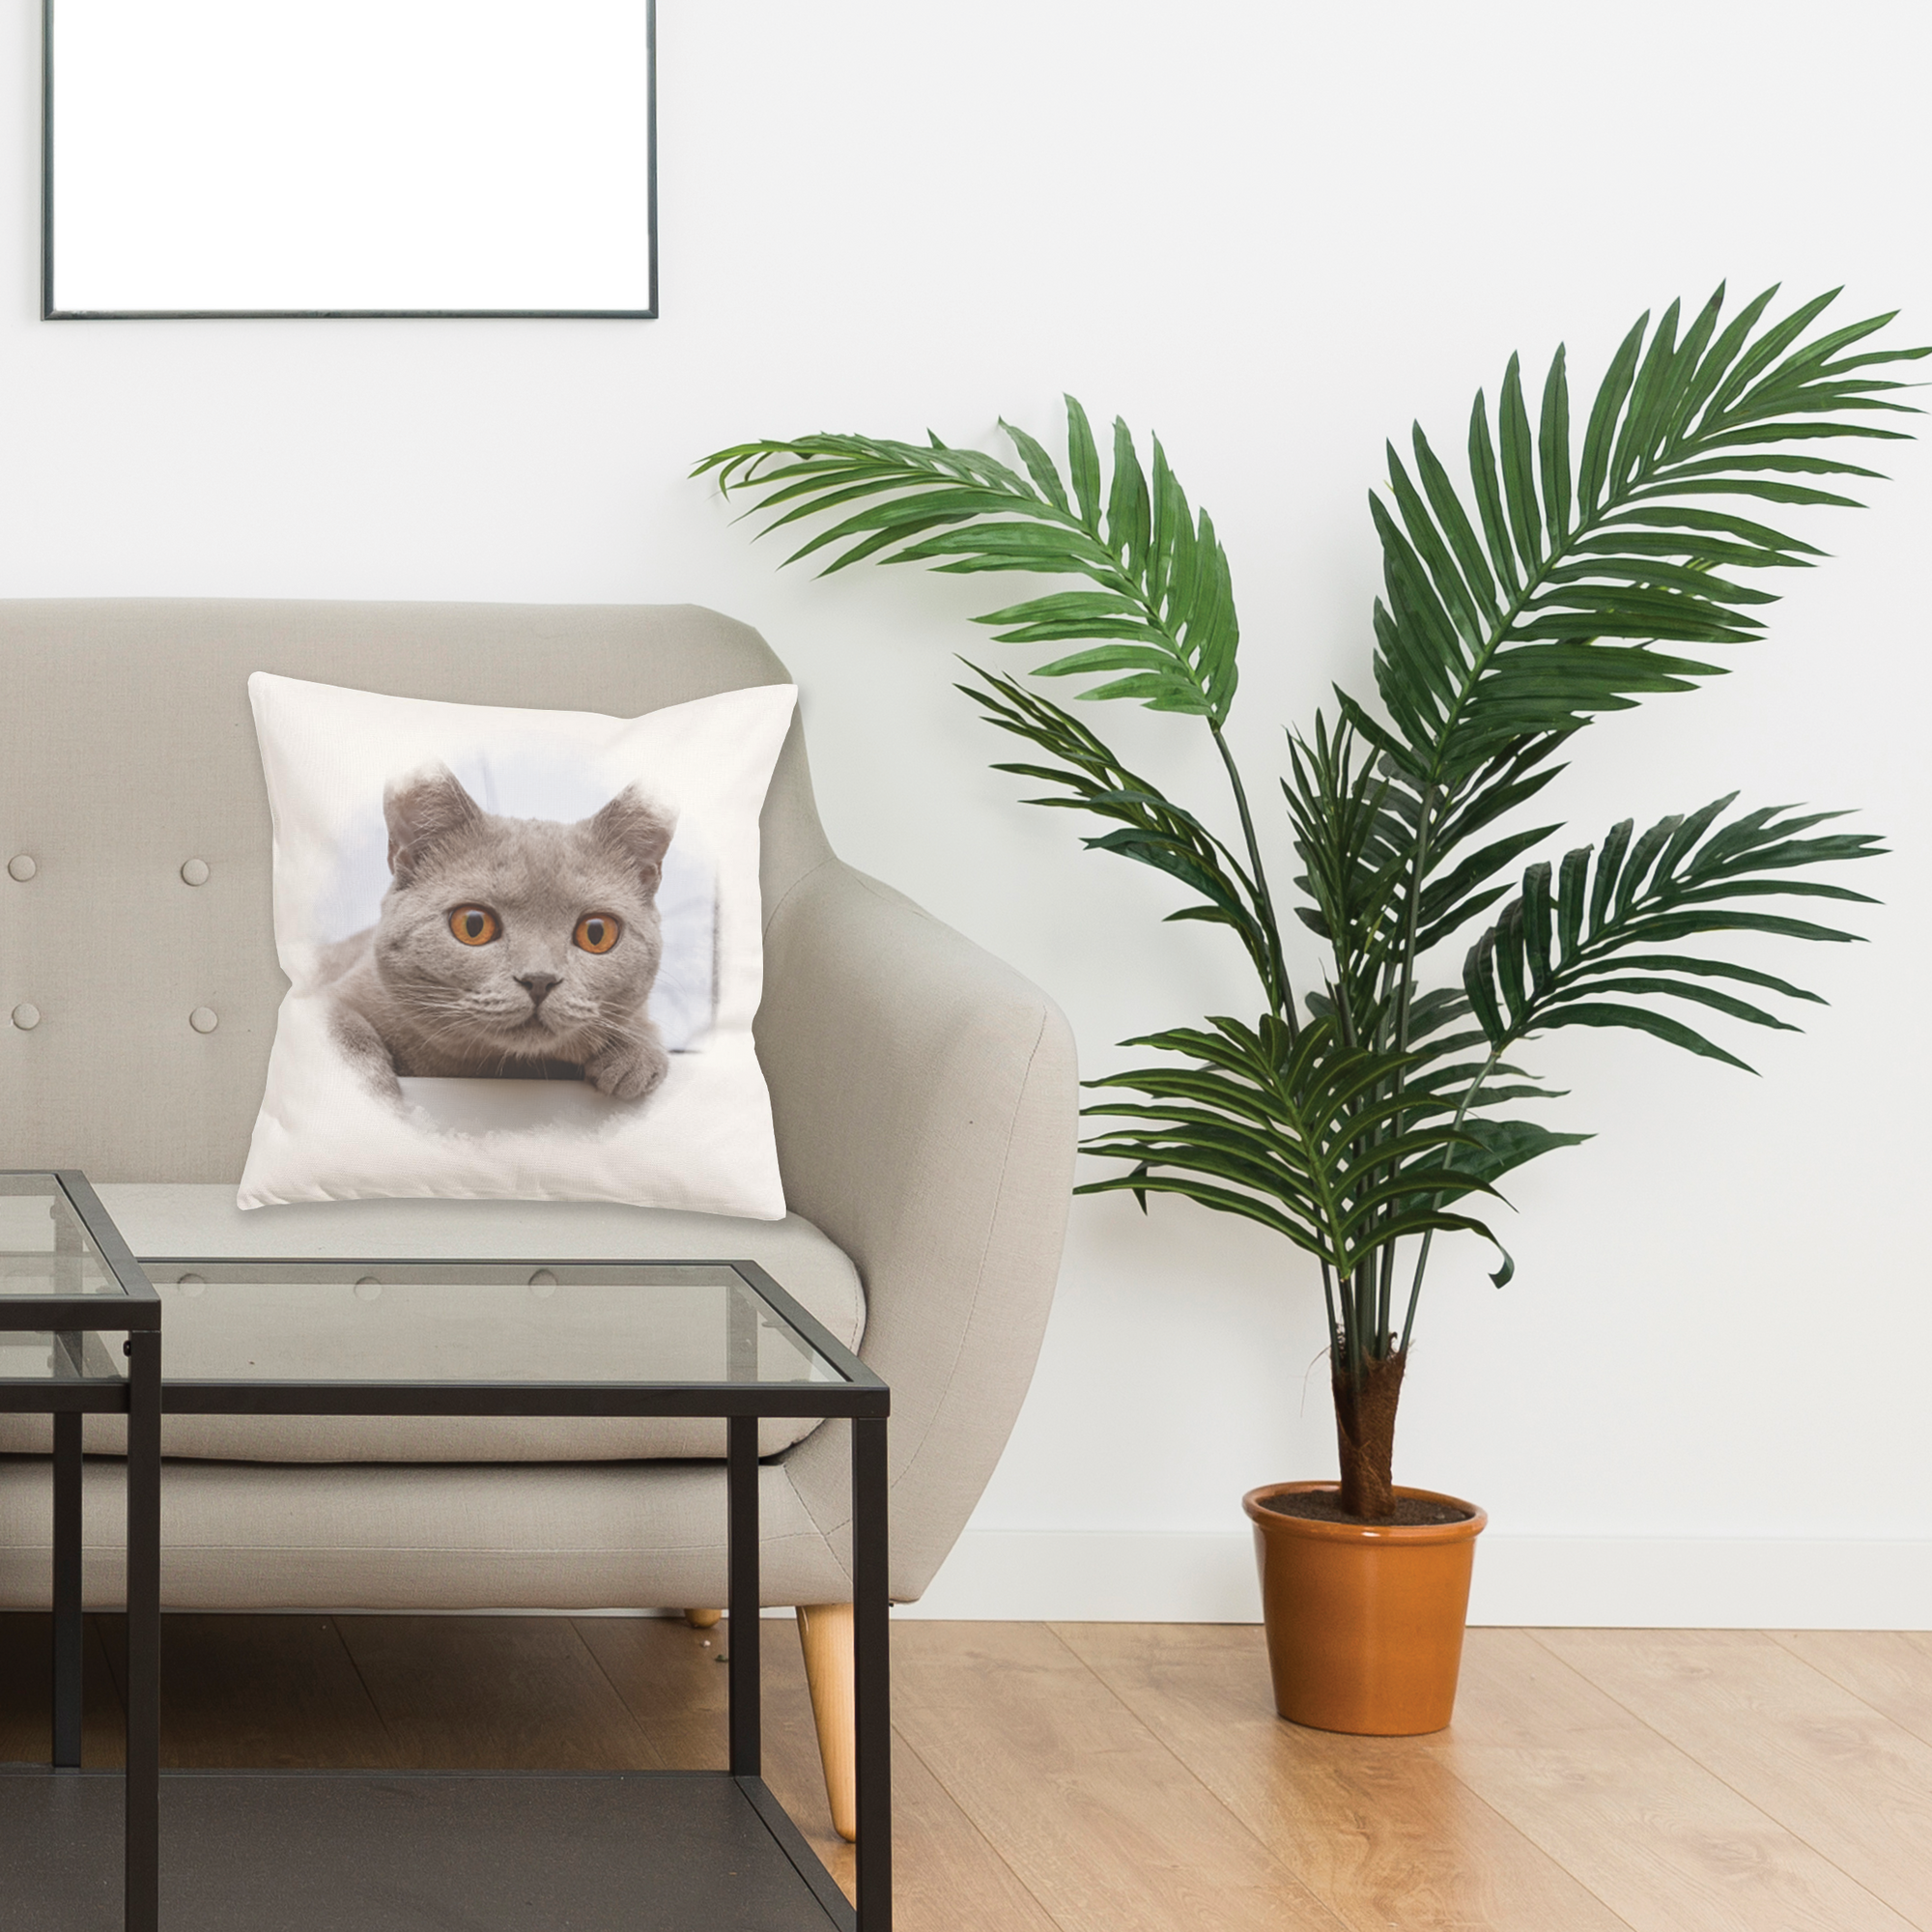 Customize Your Pet's Home Cushion